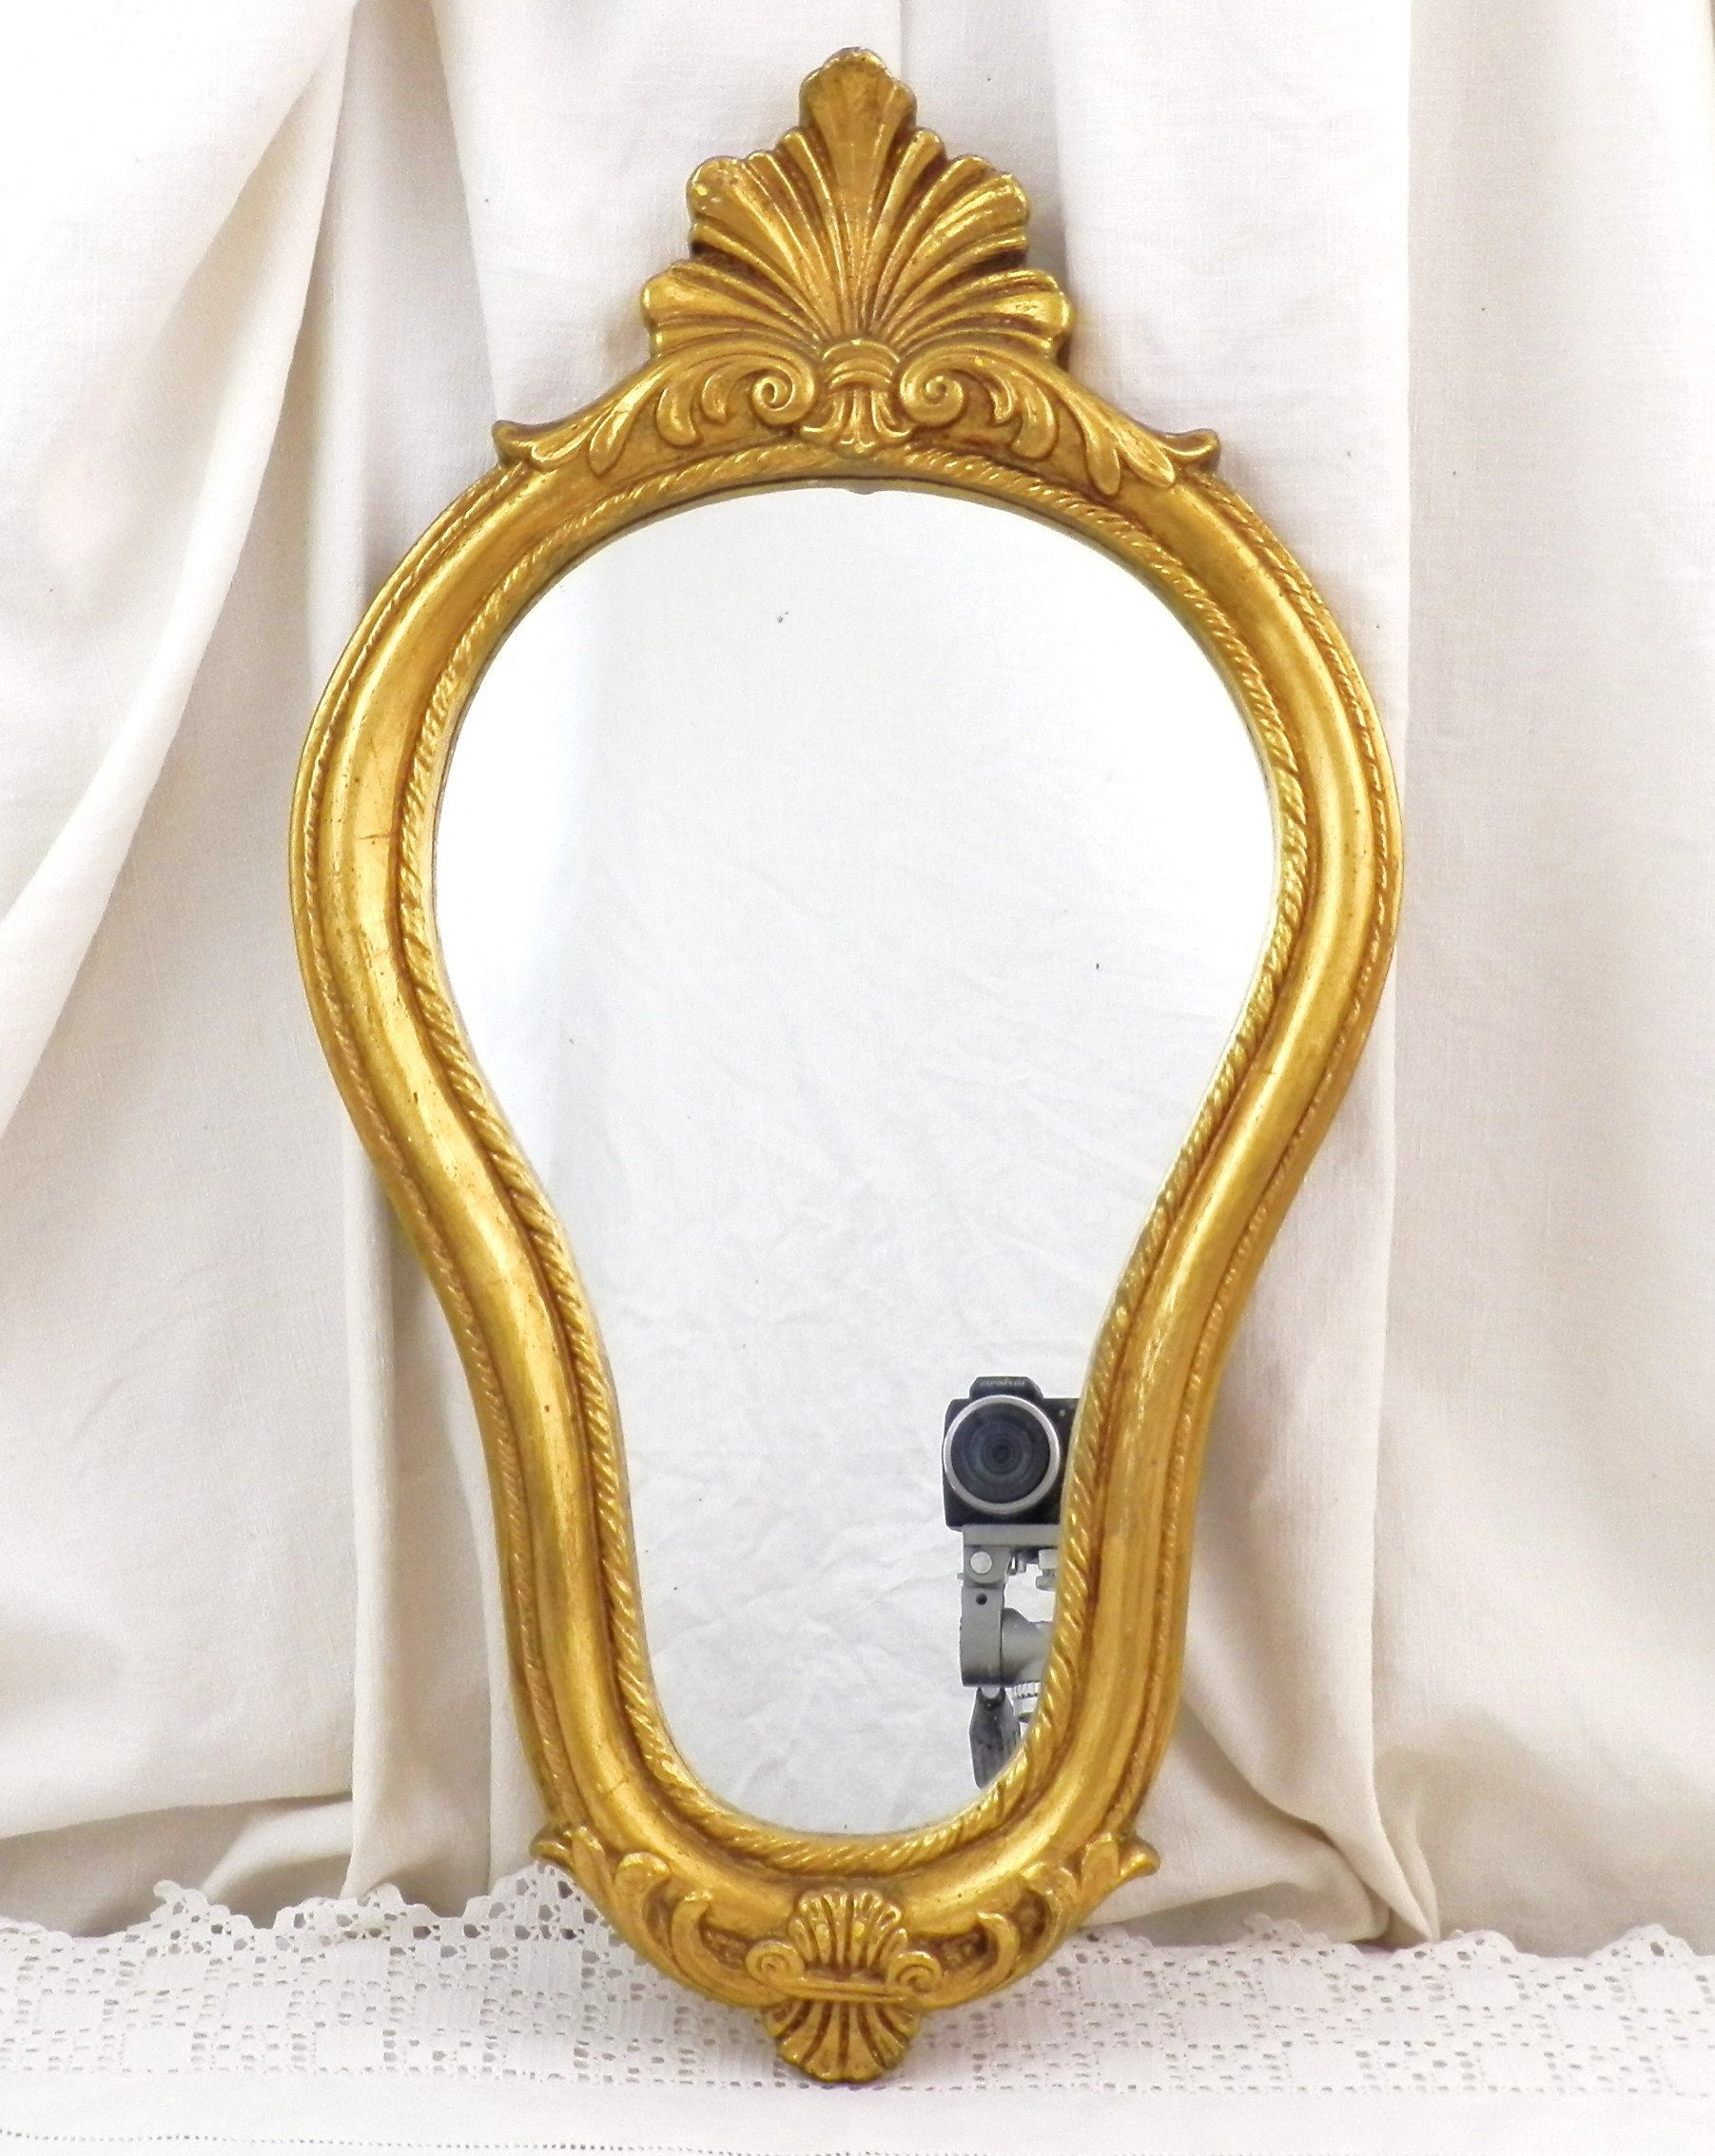 Vintage French Ornate Rocco Baroque Style Gilt Resin Framed Wall Mirror Throughout Karn Vertical Round Resin Wall Mirrors (View 10 of 15)